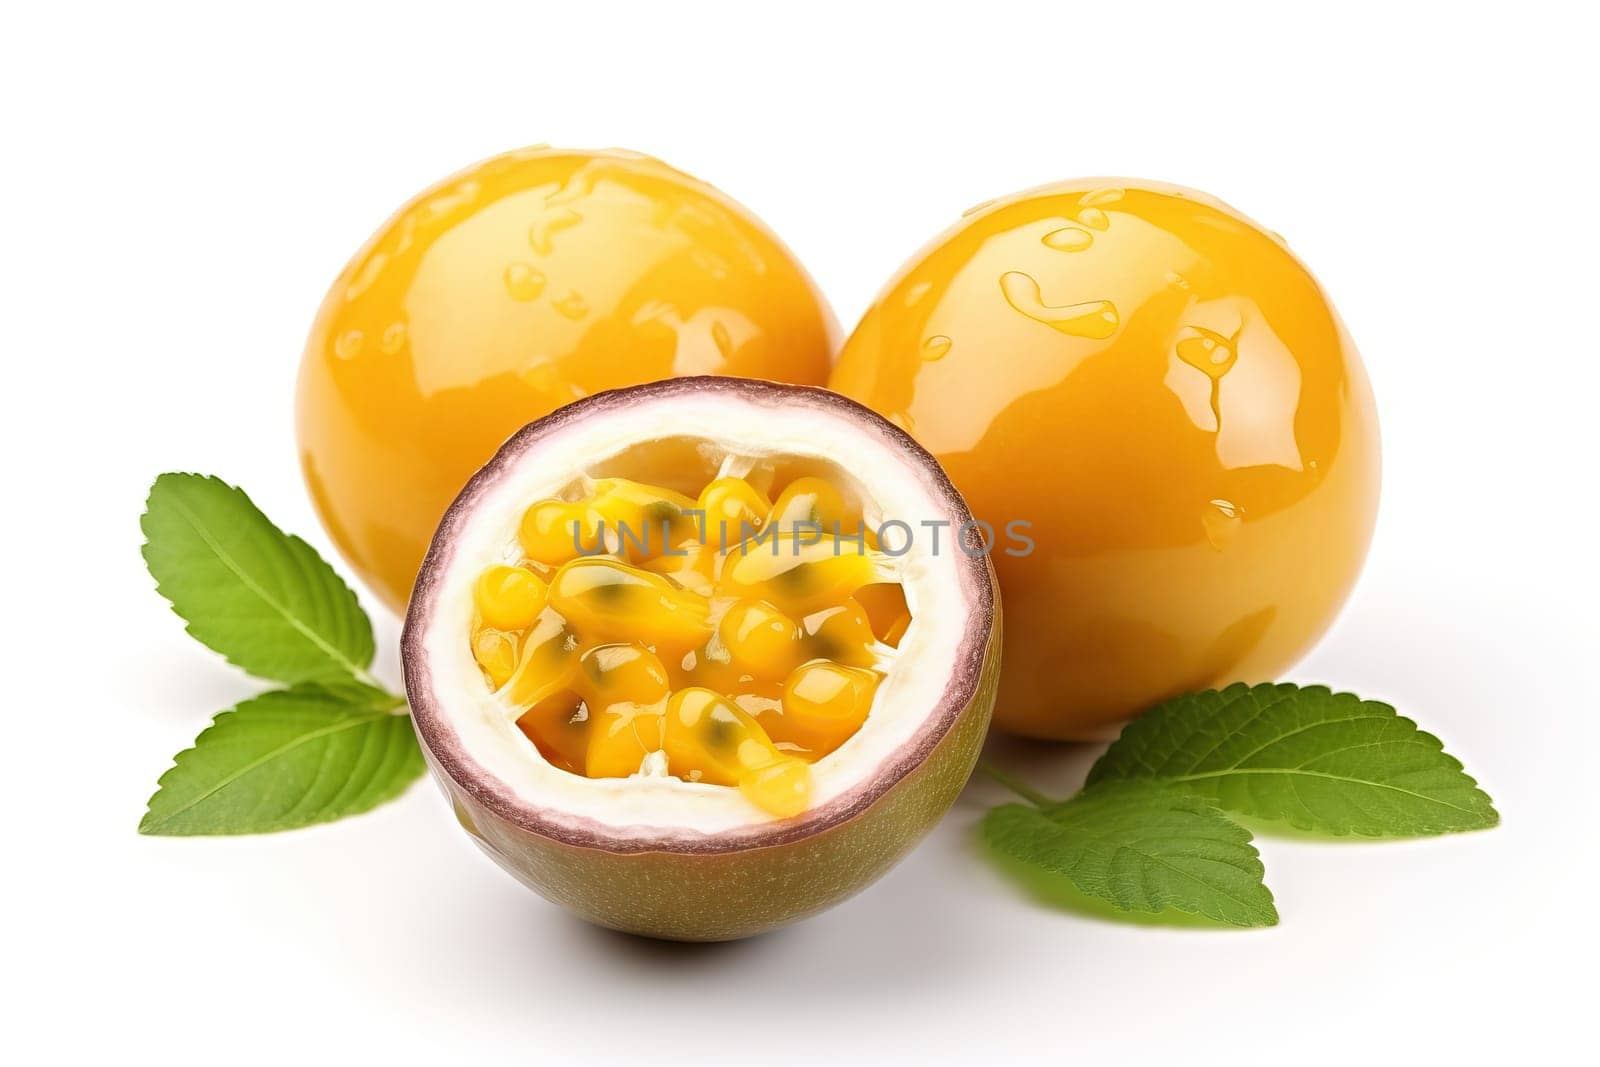 Passion fruit closeup isolated on white background, yellow whole passion fruit with one cut in half.